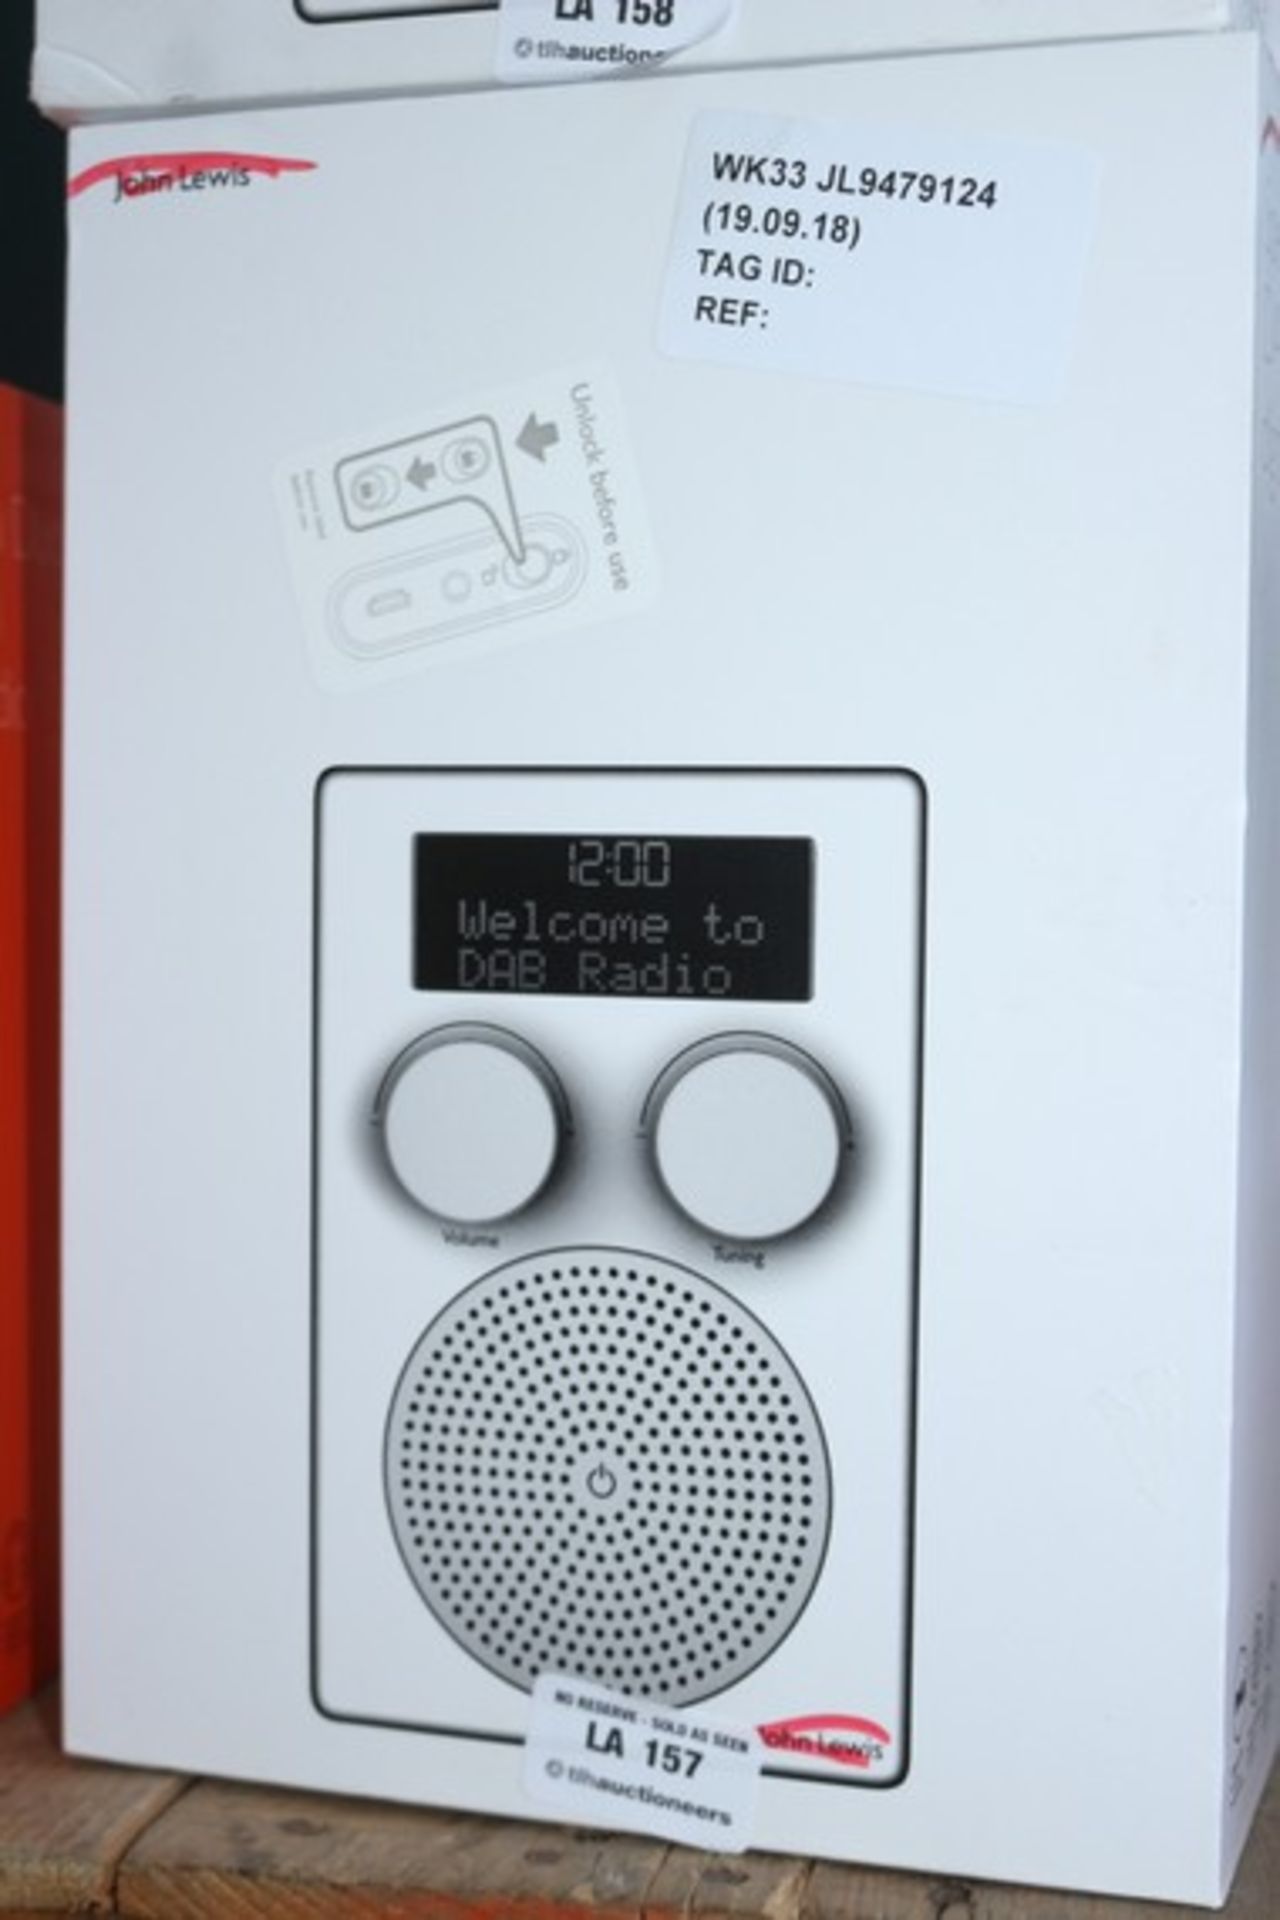 2 x JOHN LEWIS SPECTRUM DAB AND FM SHOWER RADIO (19.08.18) *PLEASE NOTE THAT THE BID PRICE IS